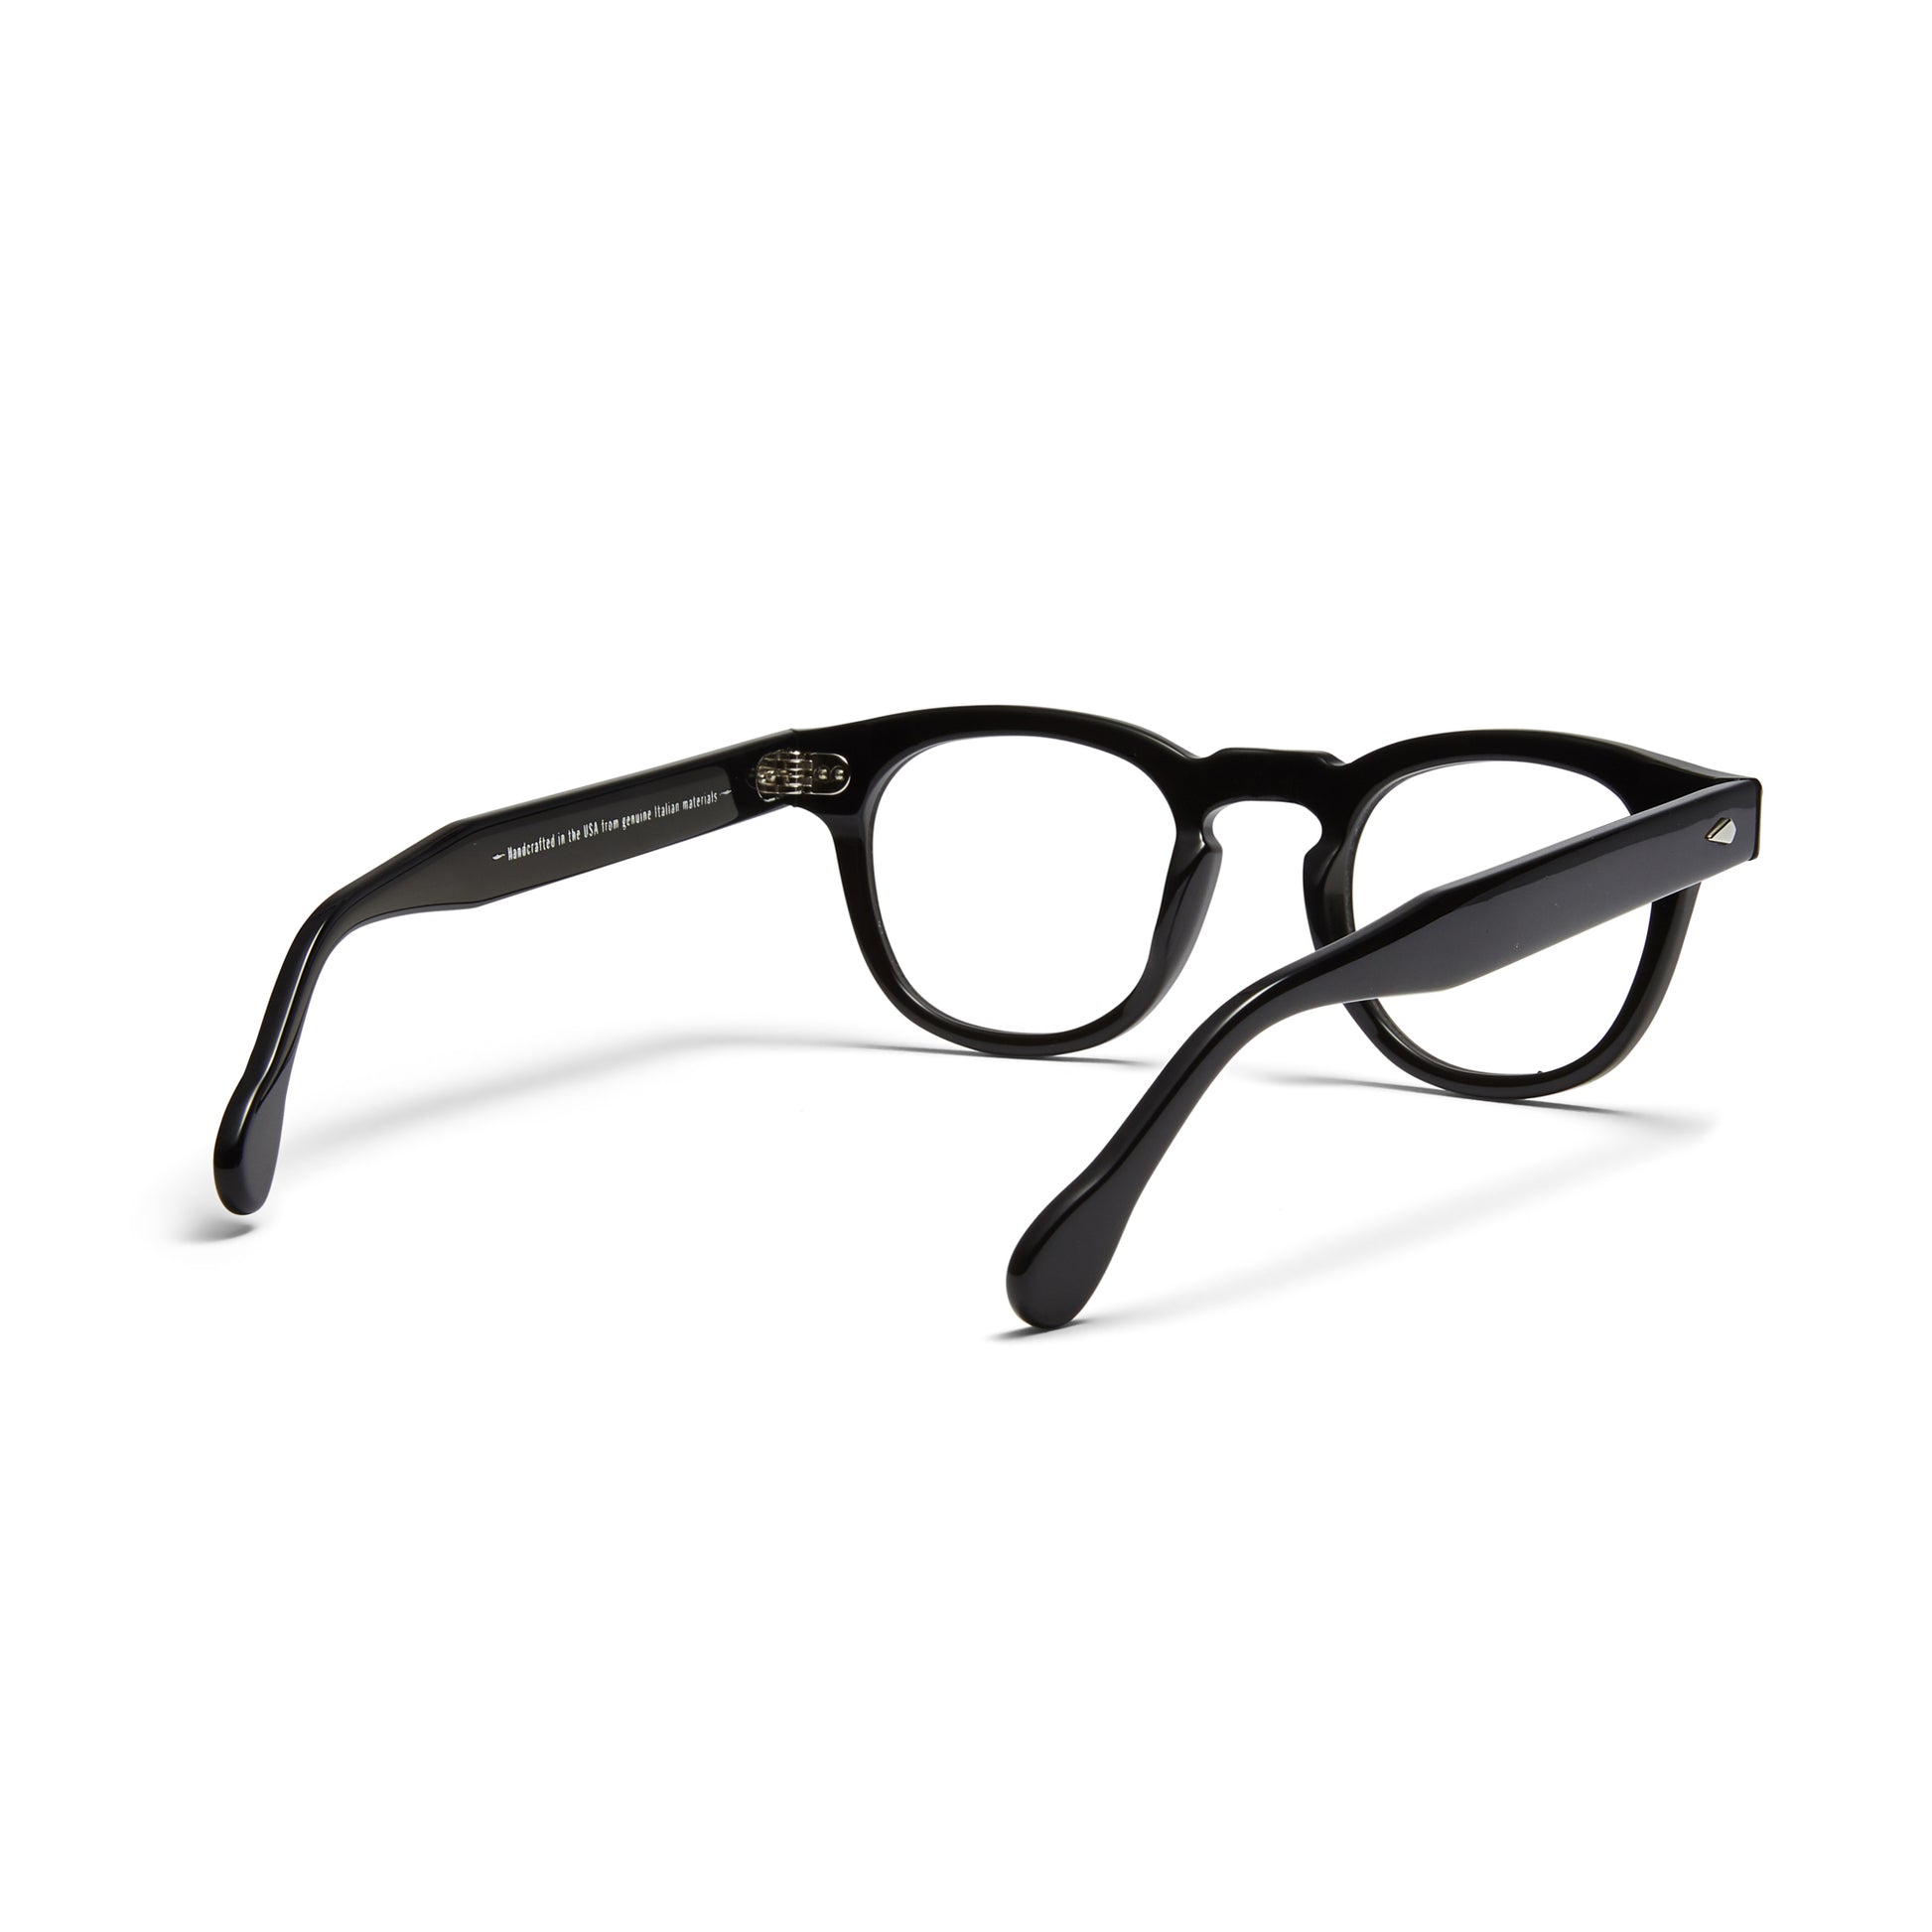 A back view of the glossy black Arnel USA frame—the Vintage eyewear. 